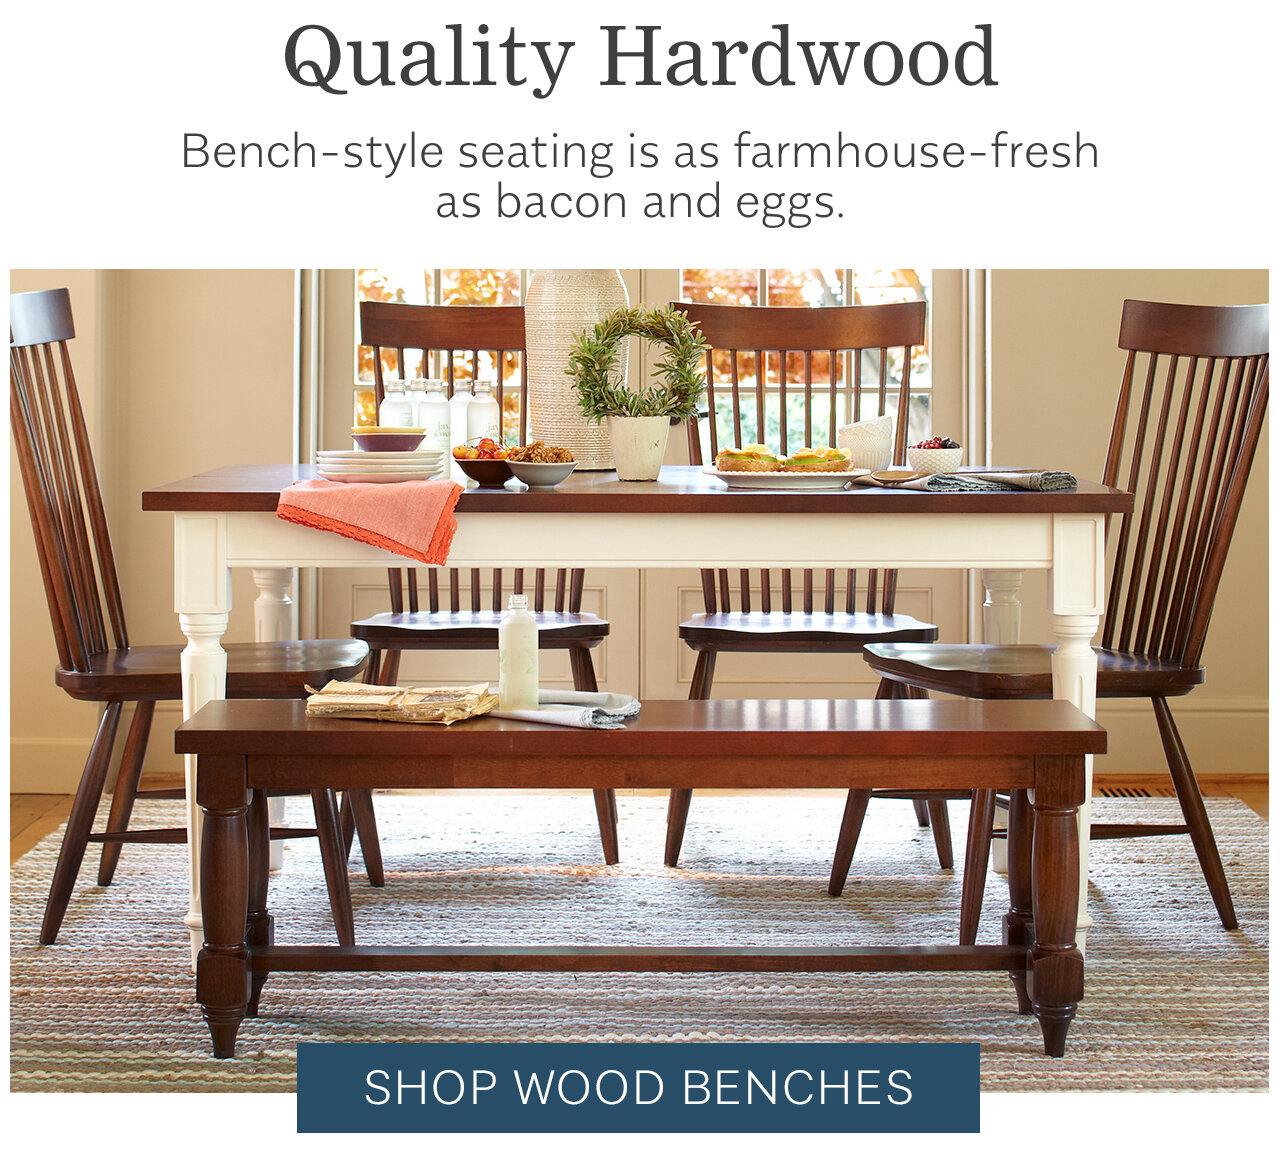 Quality Hardwood Bench-style seating is as farmhouse-fresh as bacon and eggs. 'm IR -3 - SHOP WOOD BENCHES 